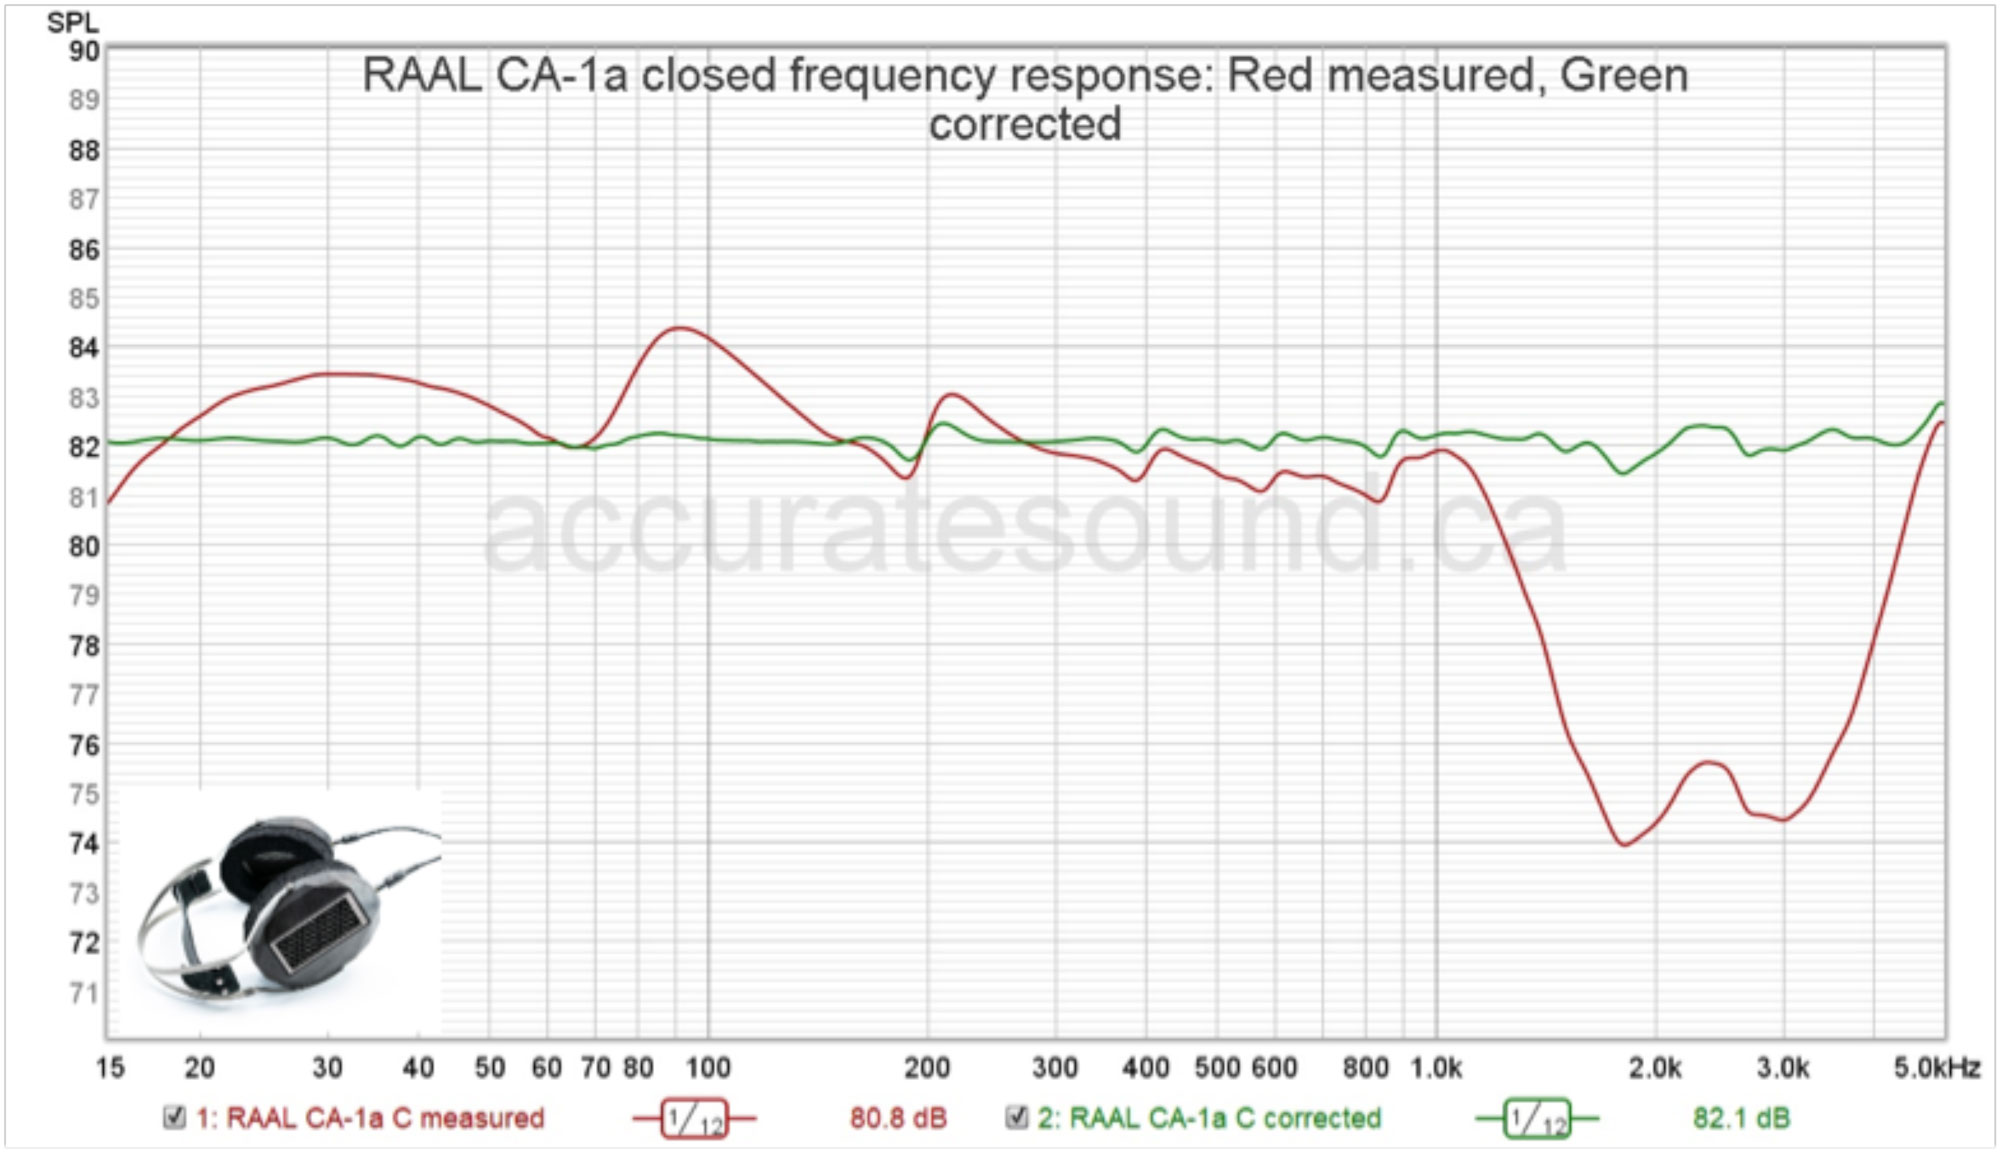 RAAL requisite CA-1a closed frequency